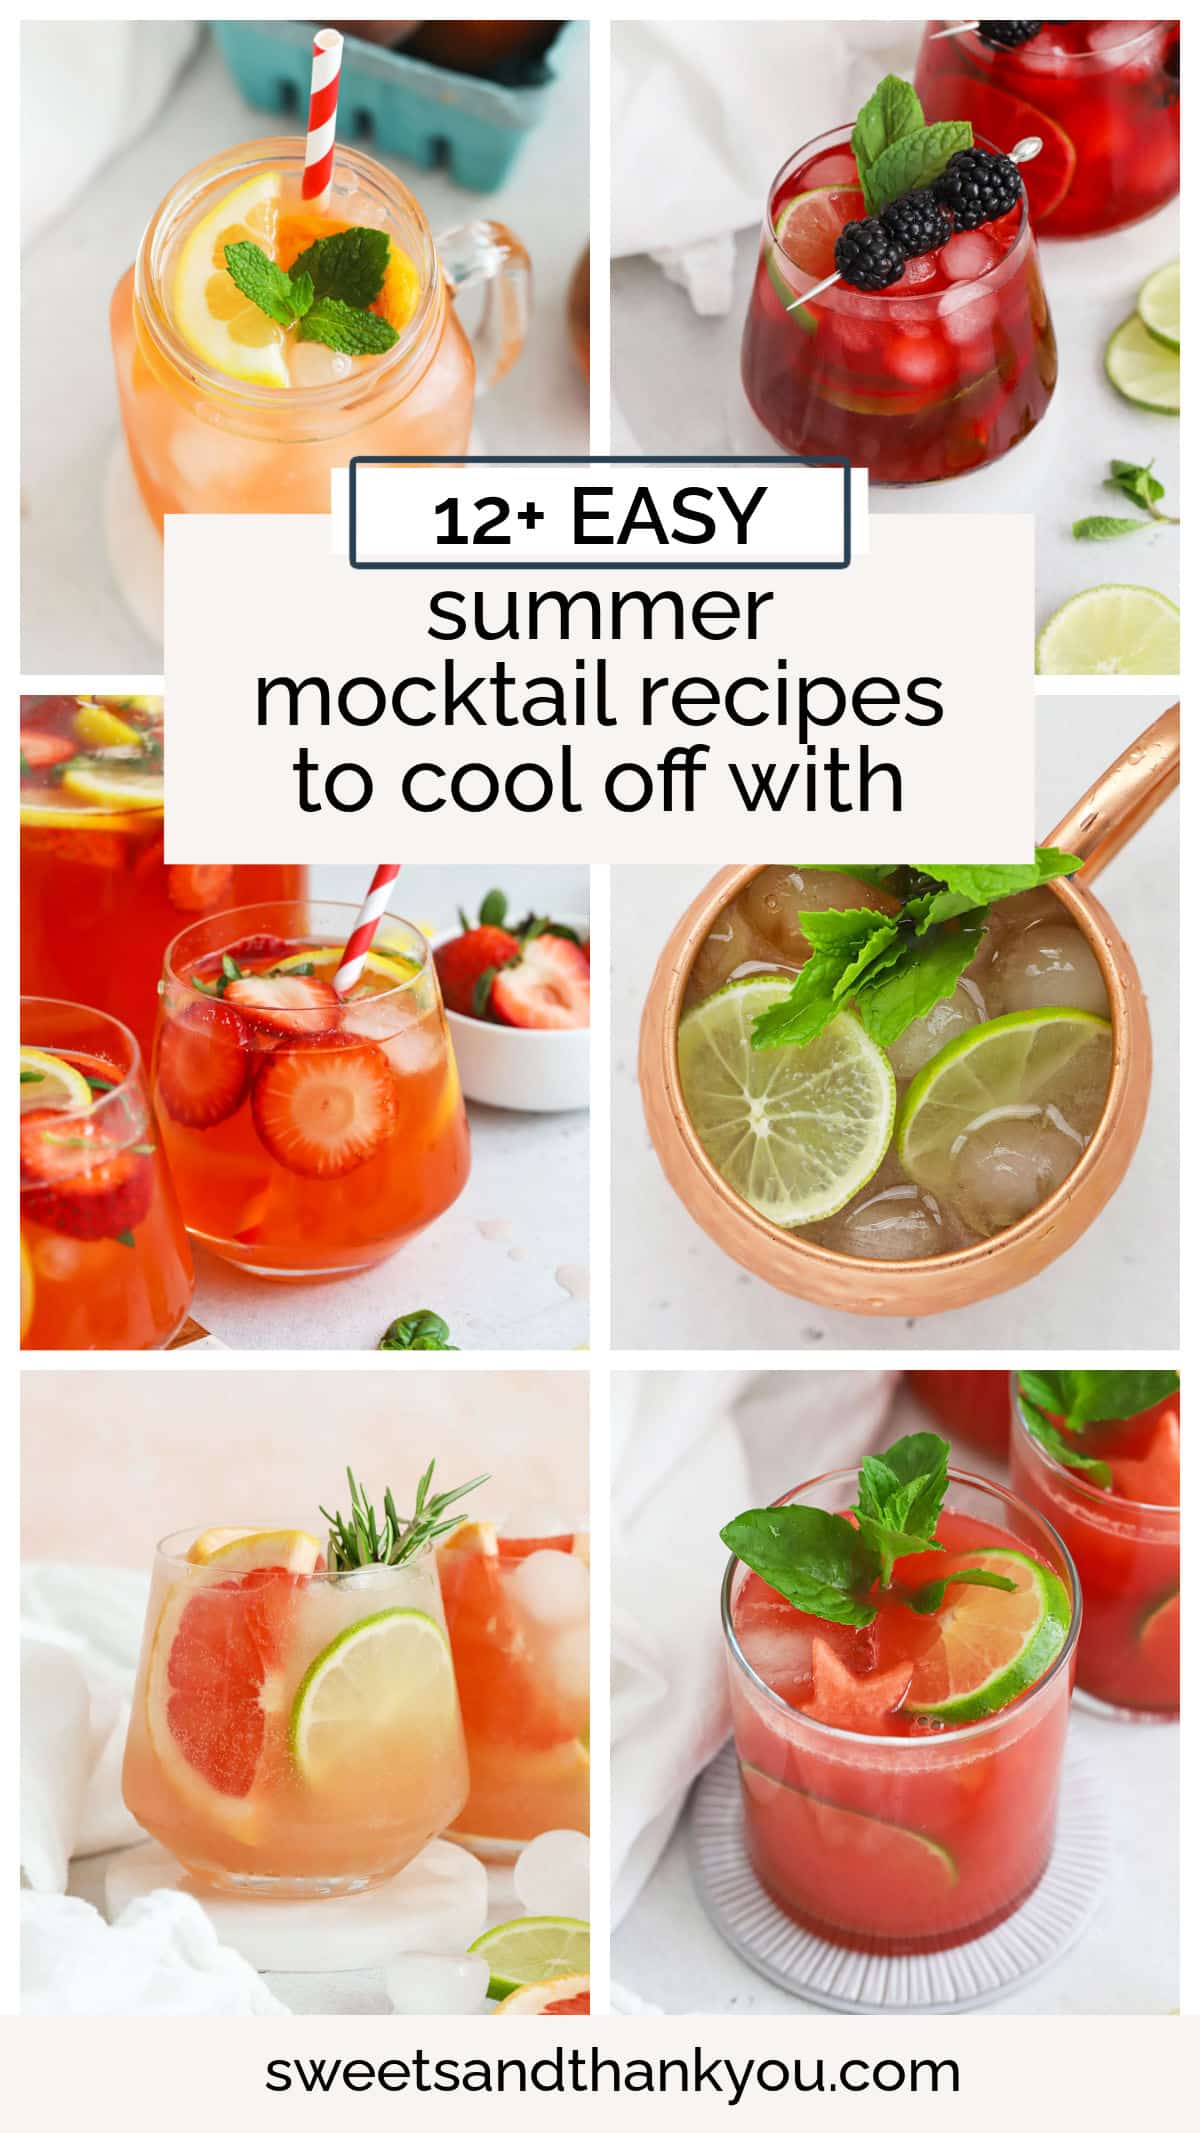 Cool of with these 10 summer mocktail recipes! These delicious non-alcoholic summer drinks will help you beat the heat in style. / summer drink recipes / summer mocktail recipes / family friendly summer drinks / summer drinks for pregnancy / the best summer mocktails / non-alcoholic summer cocktails